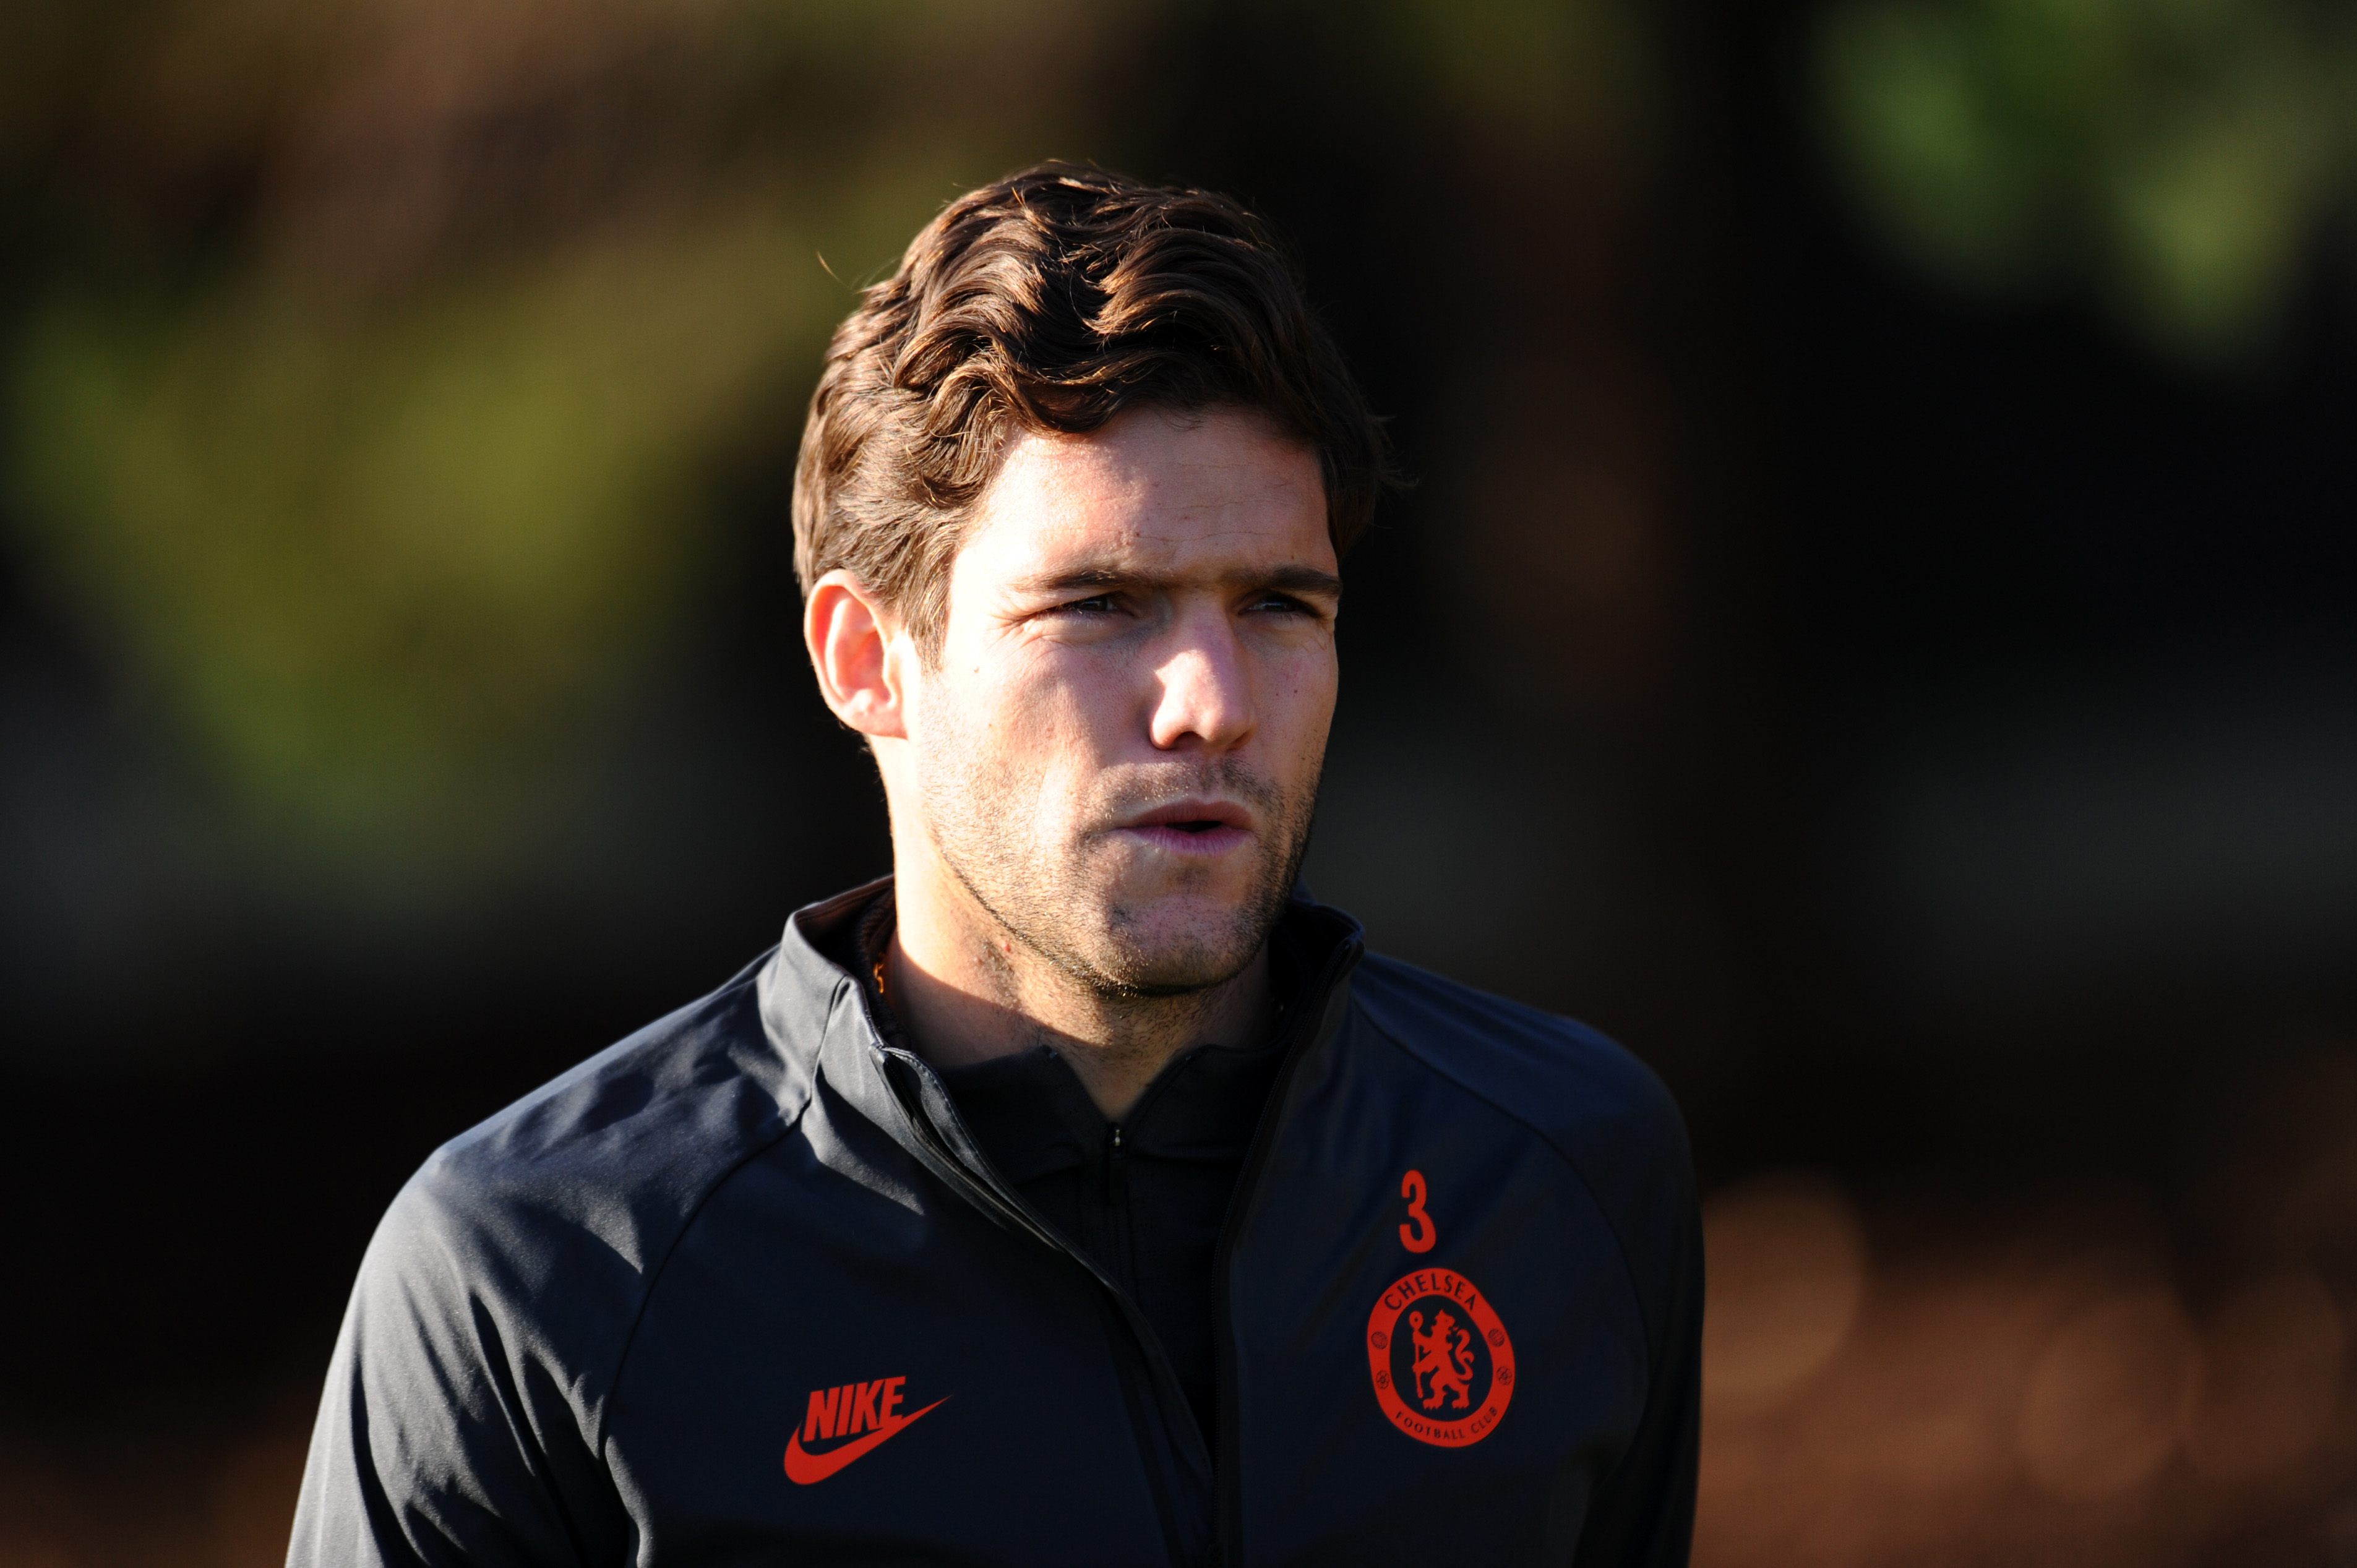 COBHAM, ENGLAND - DECEMBER 09: Marcos Alonso of Chelsea arrives for a training session ahead of their UEFA Champions League Group H match against Lille OSC at Chelsea Training Ground on December 09, 2019 in Cobham, England. (Photo by Alex Burstow/Getty Images)